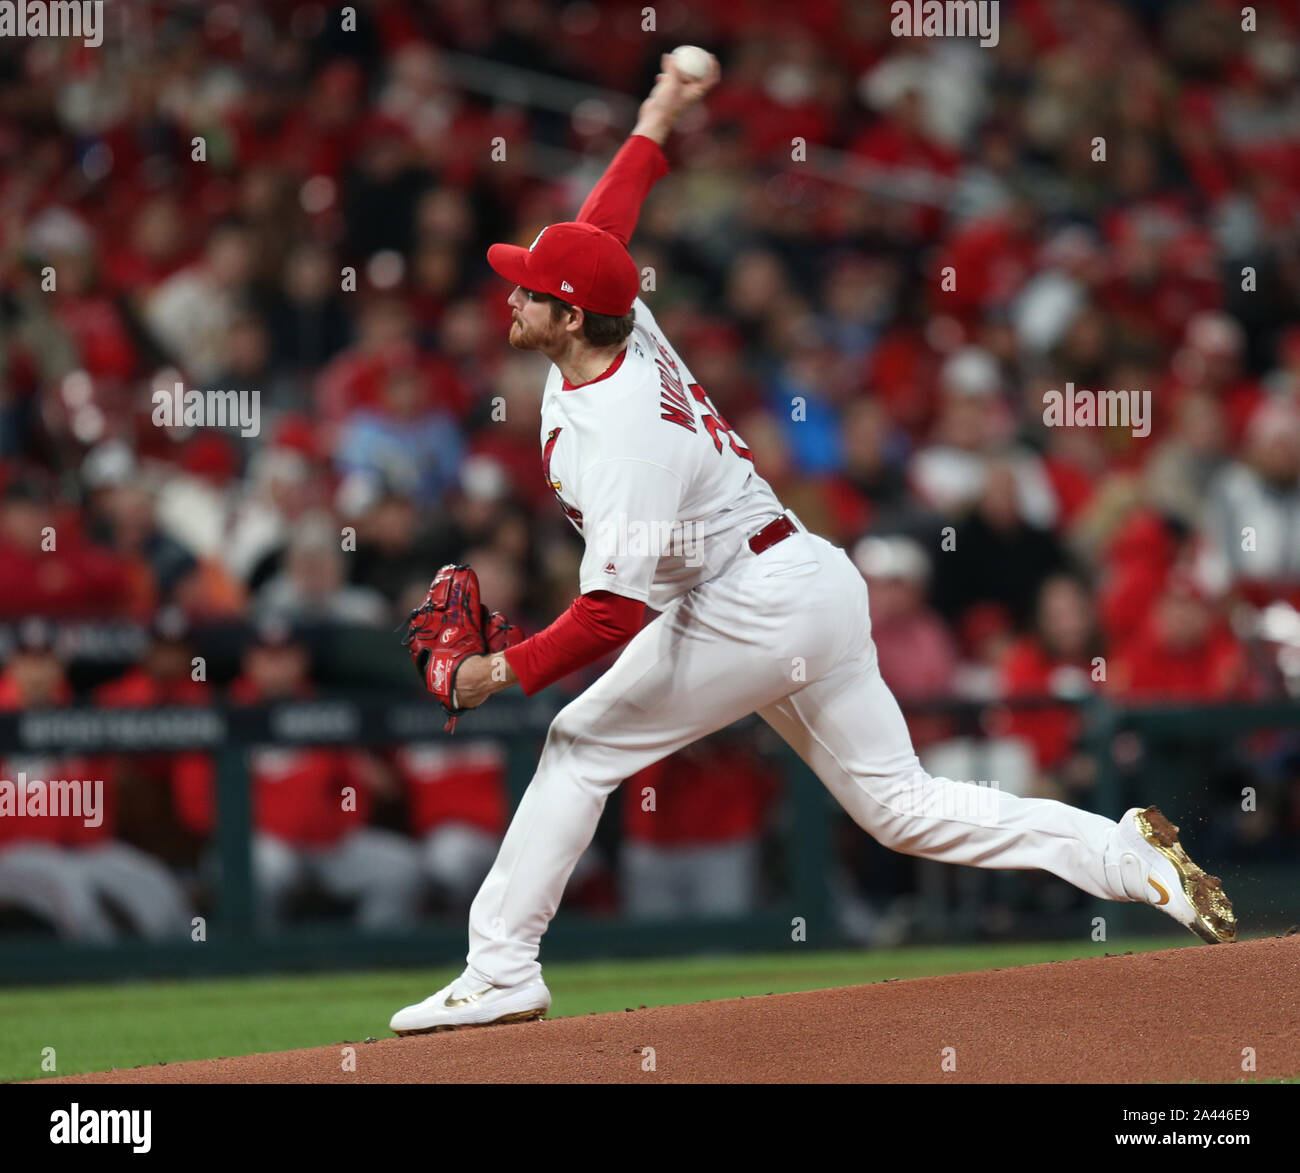 The socks and cleats worn by St. Louis Cardinals' Miles Mikolas are seen as  he throws during a baseball game against the Cincinnati Reds in Cincinnati,  Thursday, May 25, 2023. (AP Photo/Aaron